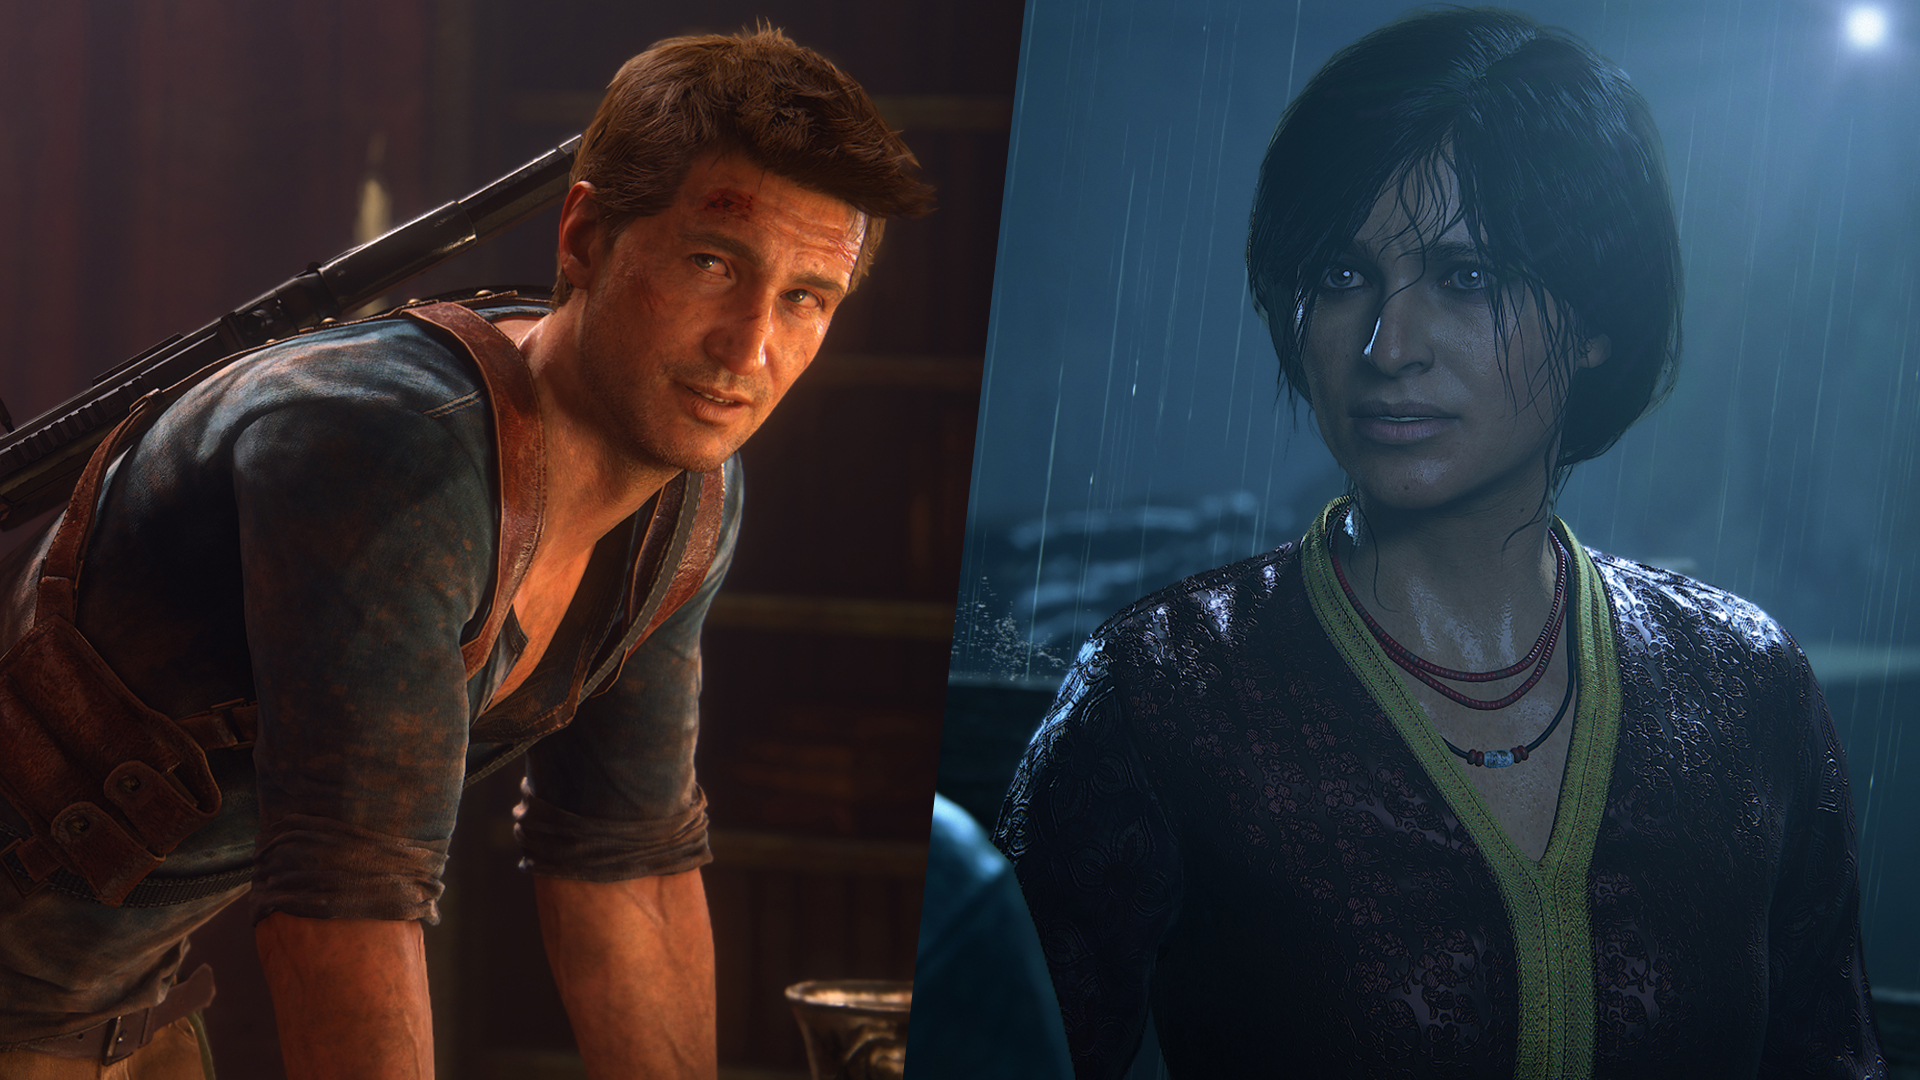 Uncharted 4 is Coming to PC - Are You Excited? 